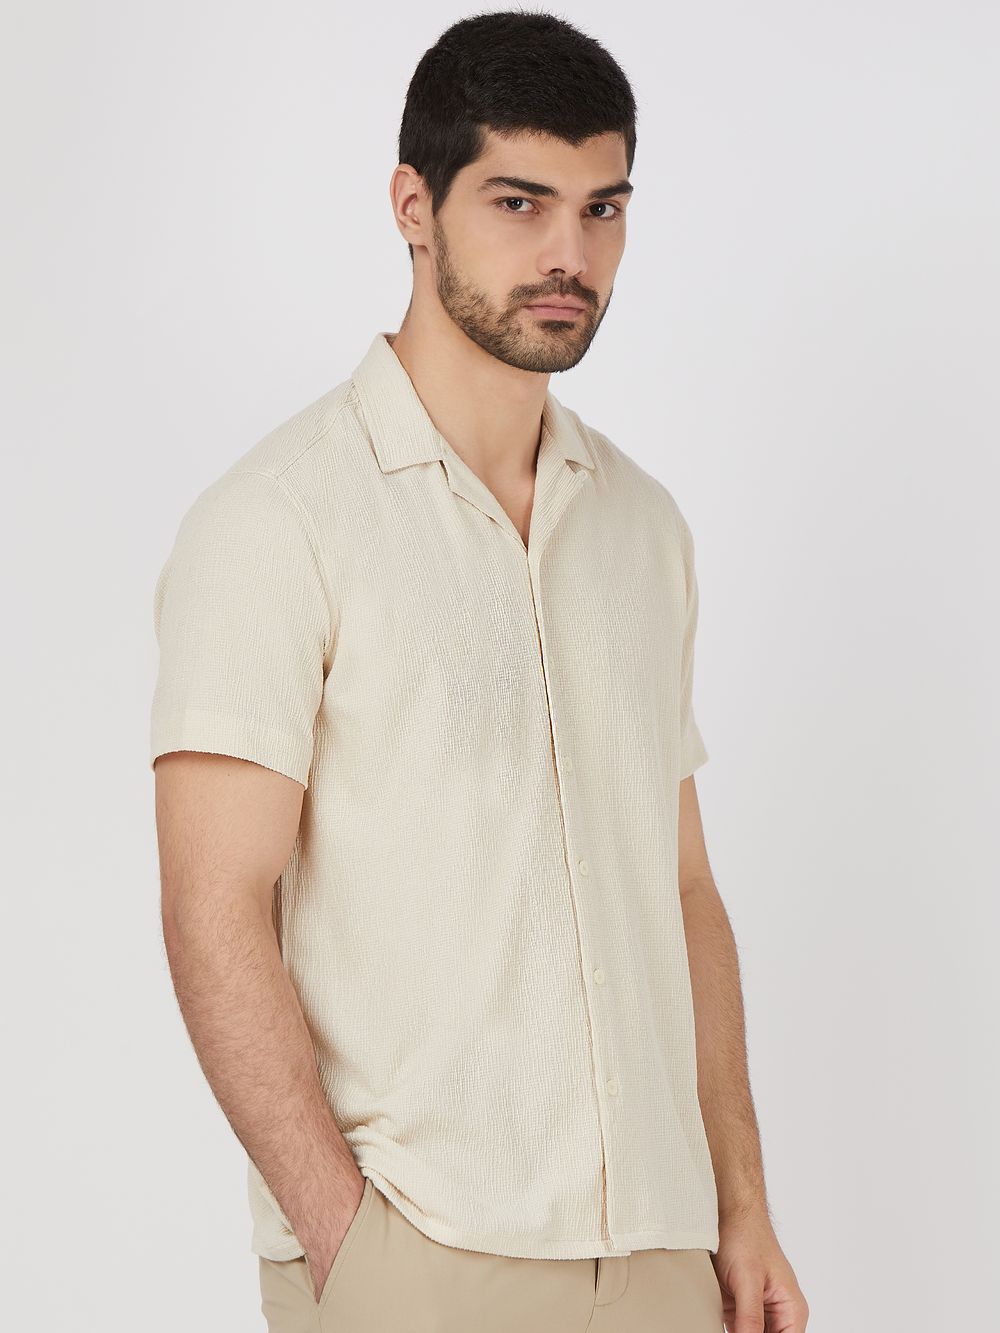 Beige Textured Plain Relaxed Fit Casual Shirt